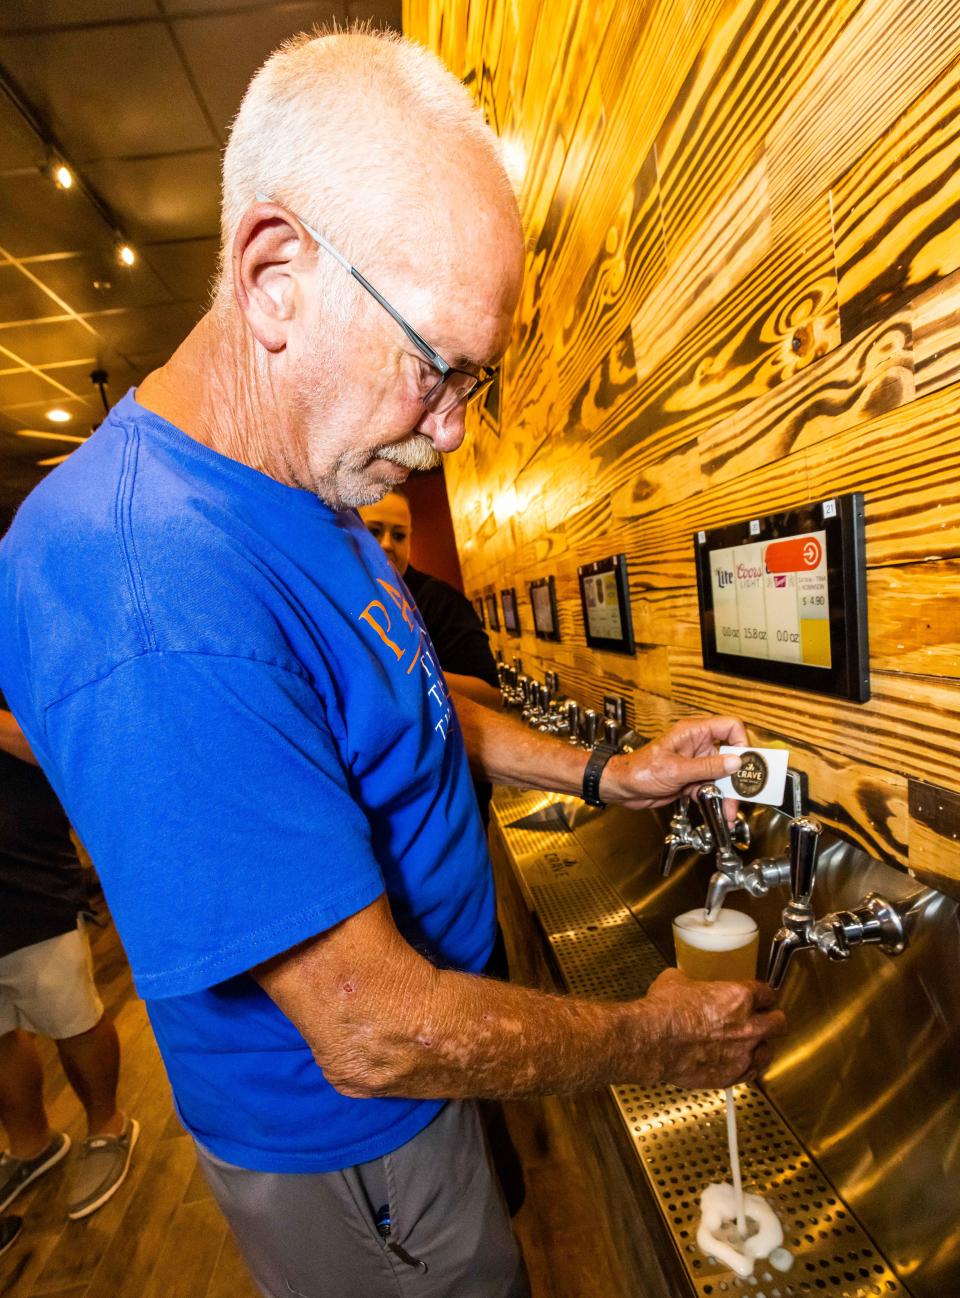 Robert Robinson pours himself a beer at the Crave Hot Dogs & BBQ soft opening on Aug. 4.